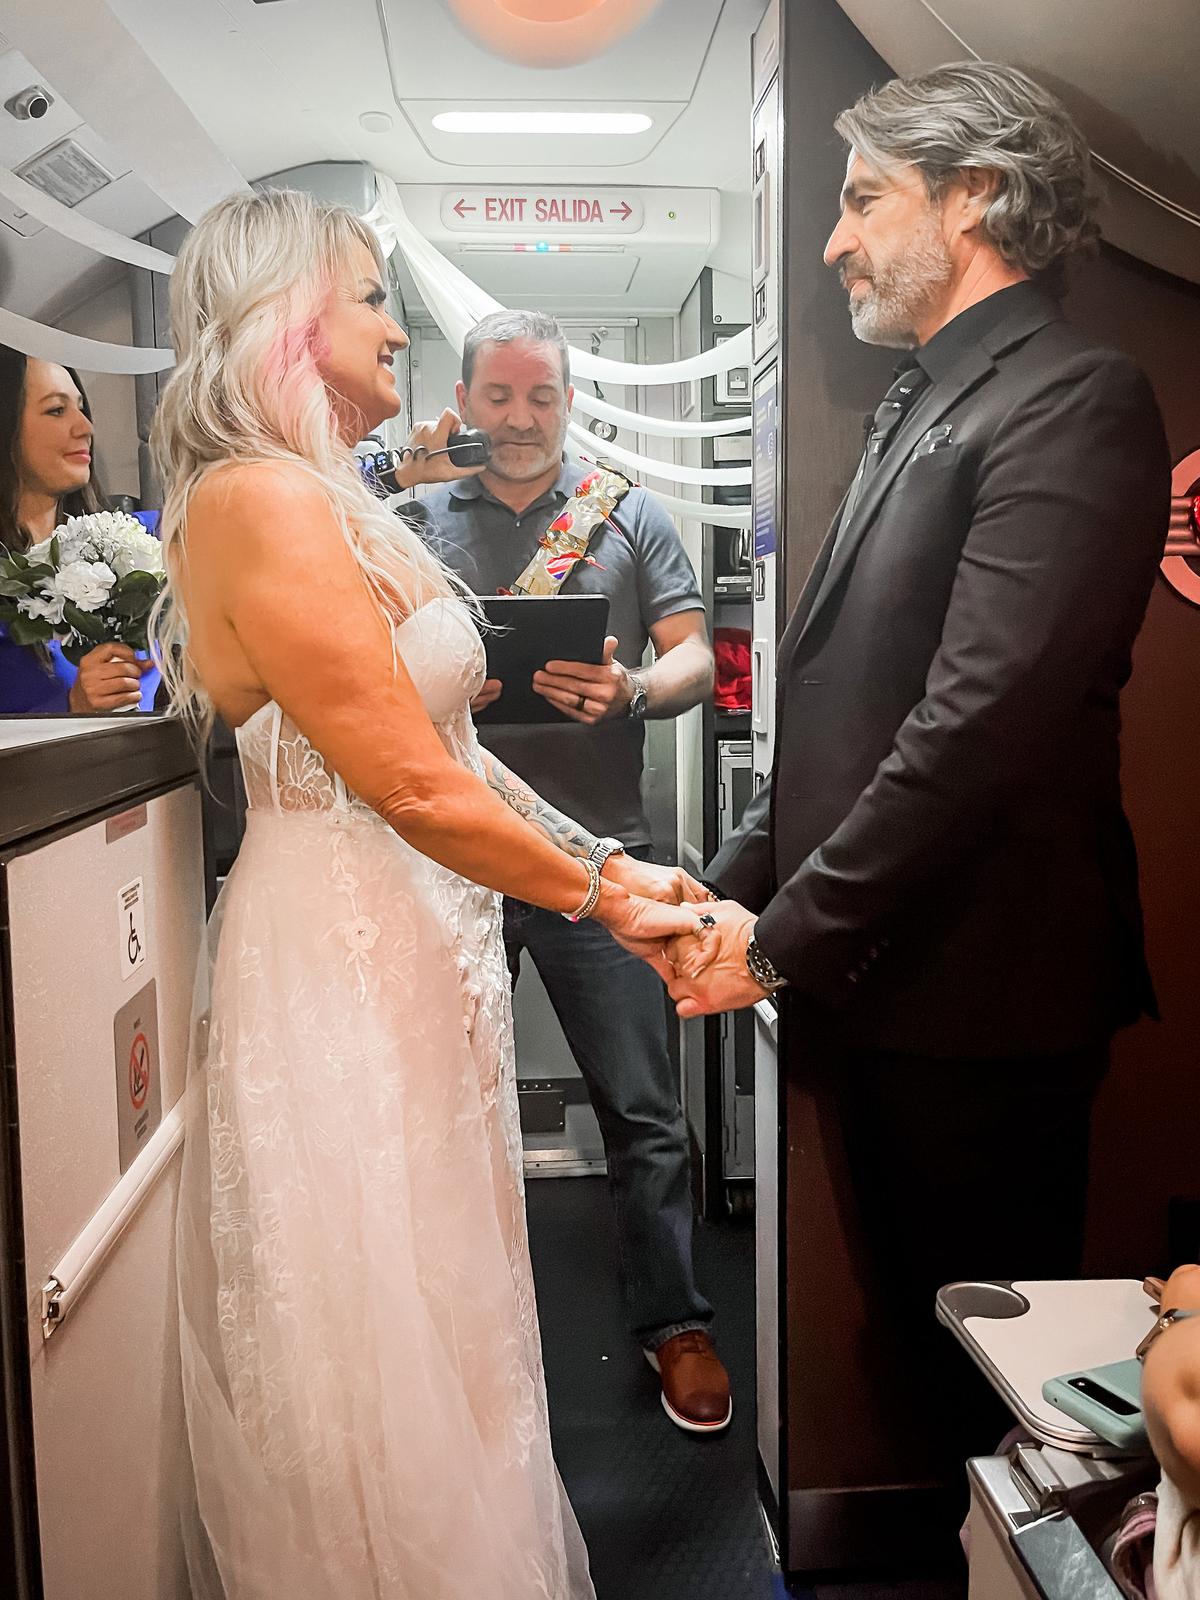 Pam and Jeremy say their wedding vows. (Courtesy of Kaitlyn Manzer)